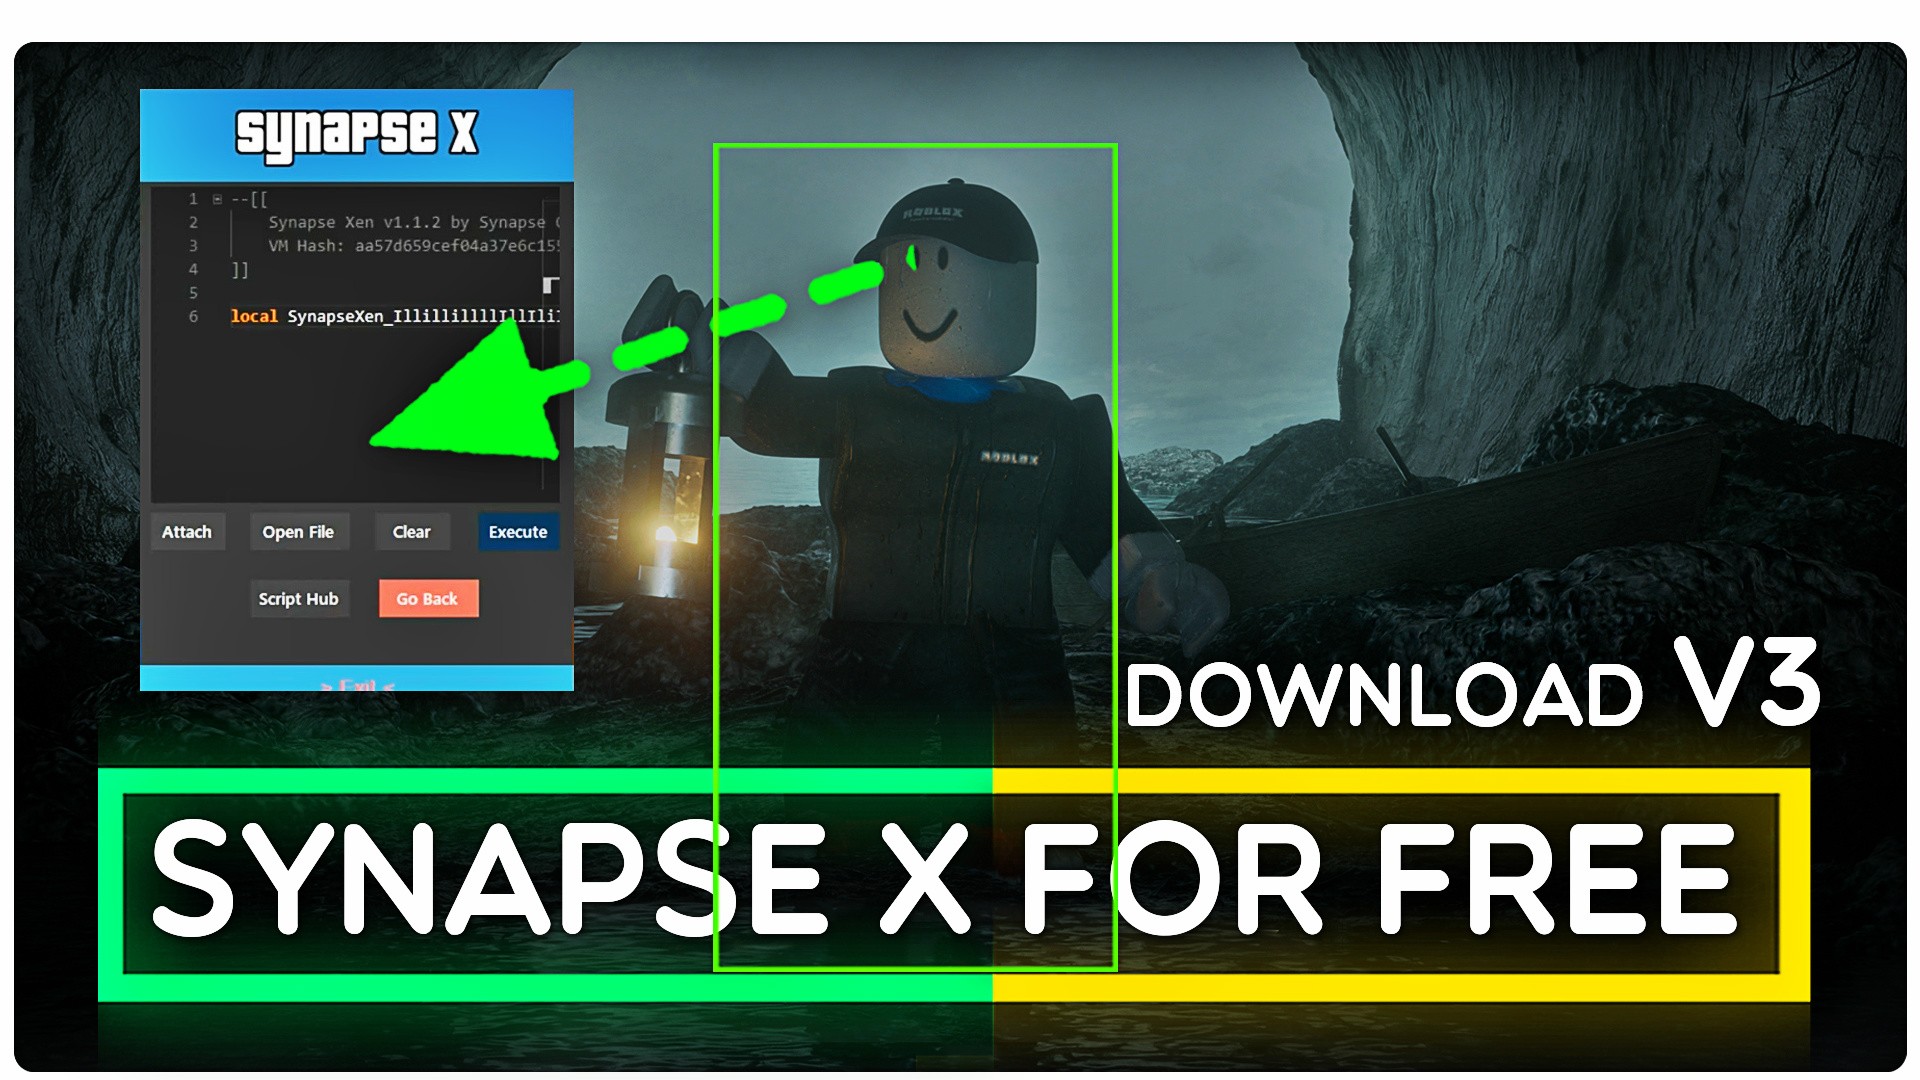 Synapse X Ver 3 Free Remake Teletype - how to get synapse x roblox for free